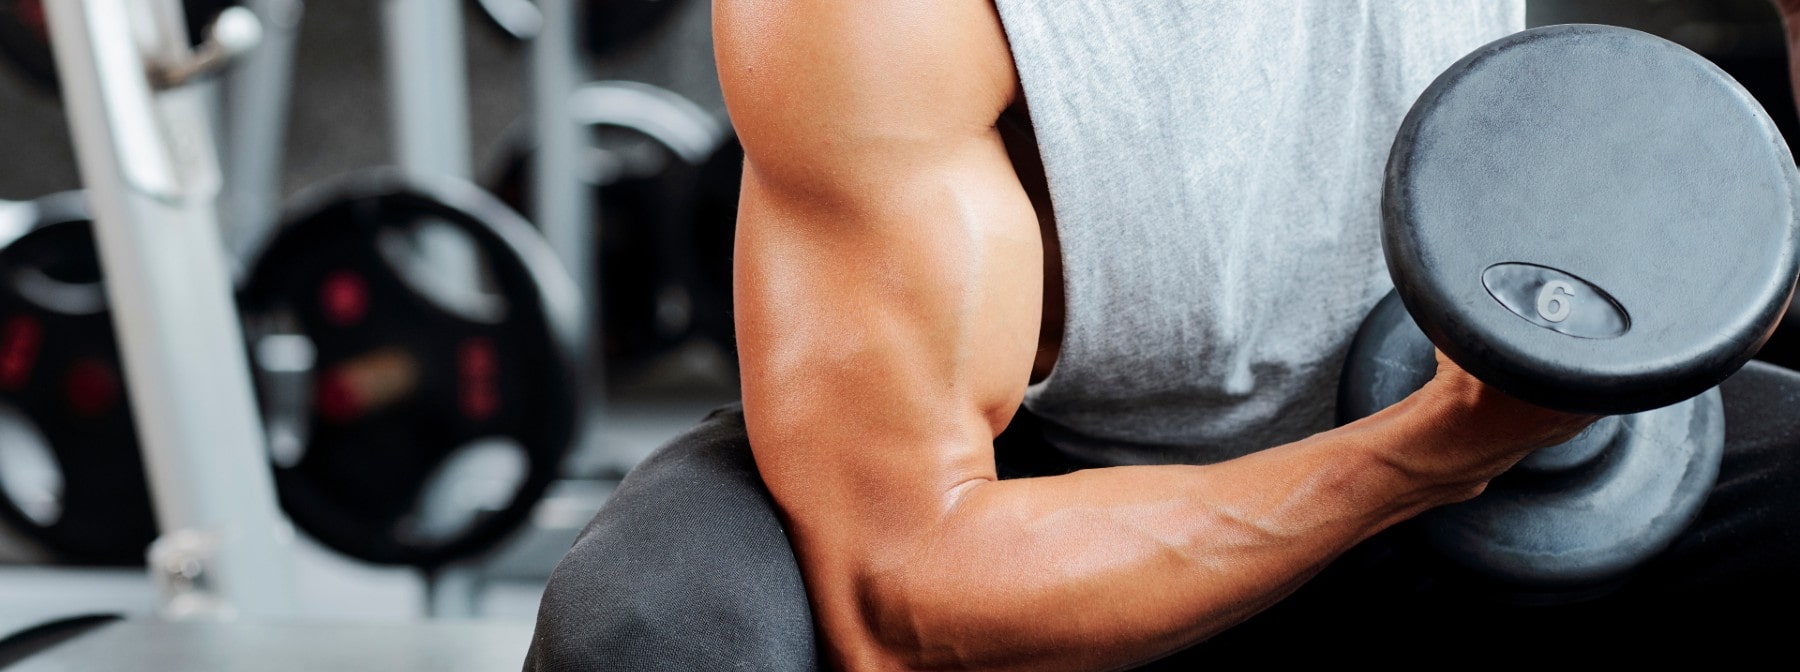 Building Biceps  The Best Exercises for Bigger Biceps - MYPROTEIN™